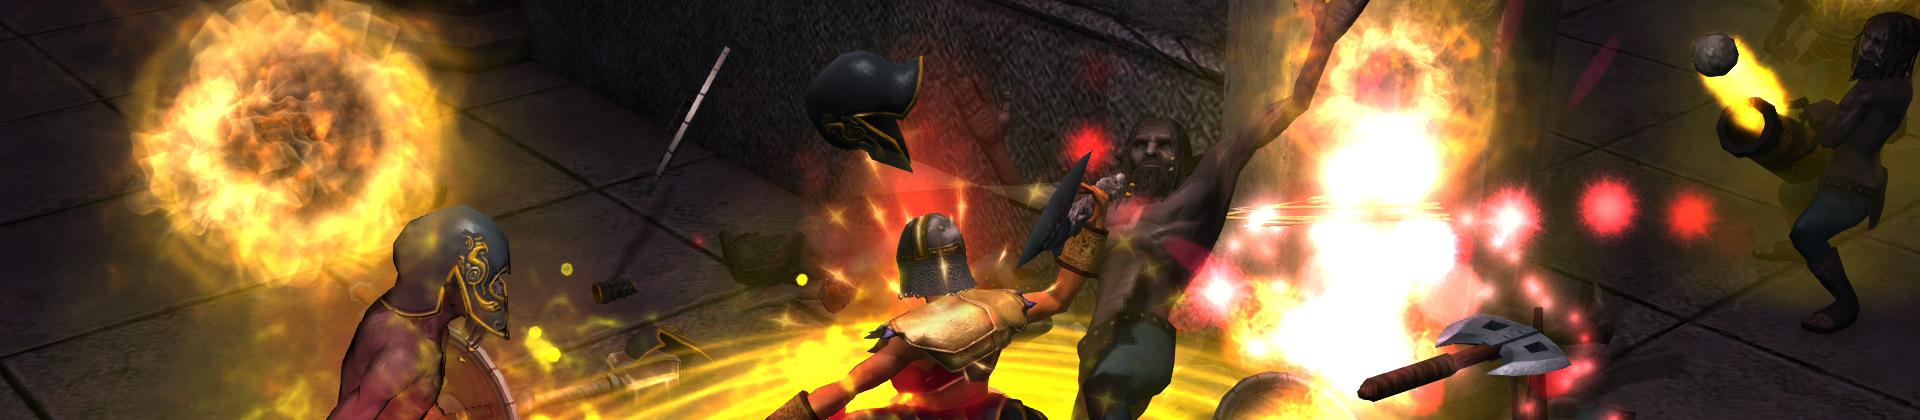 Titan Quest Anniversary Edition - Attributes and Masteries Pros/Cons - Equipment: Weapons - 2715B08